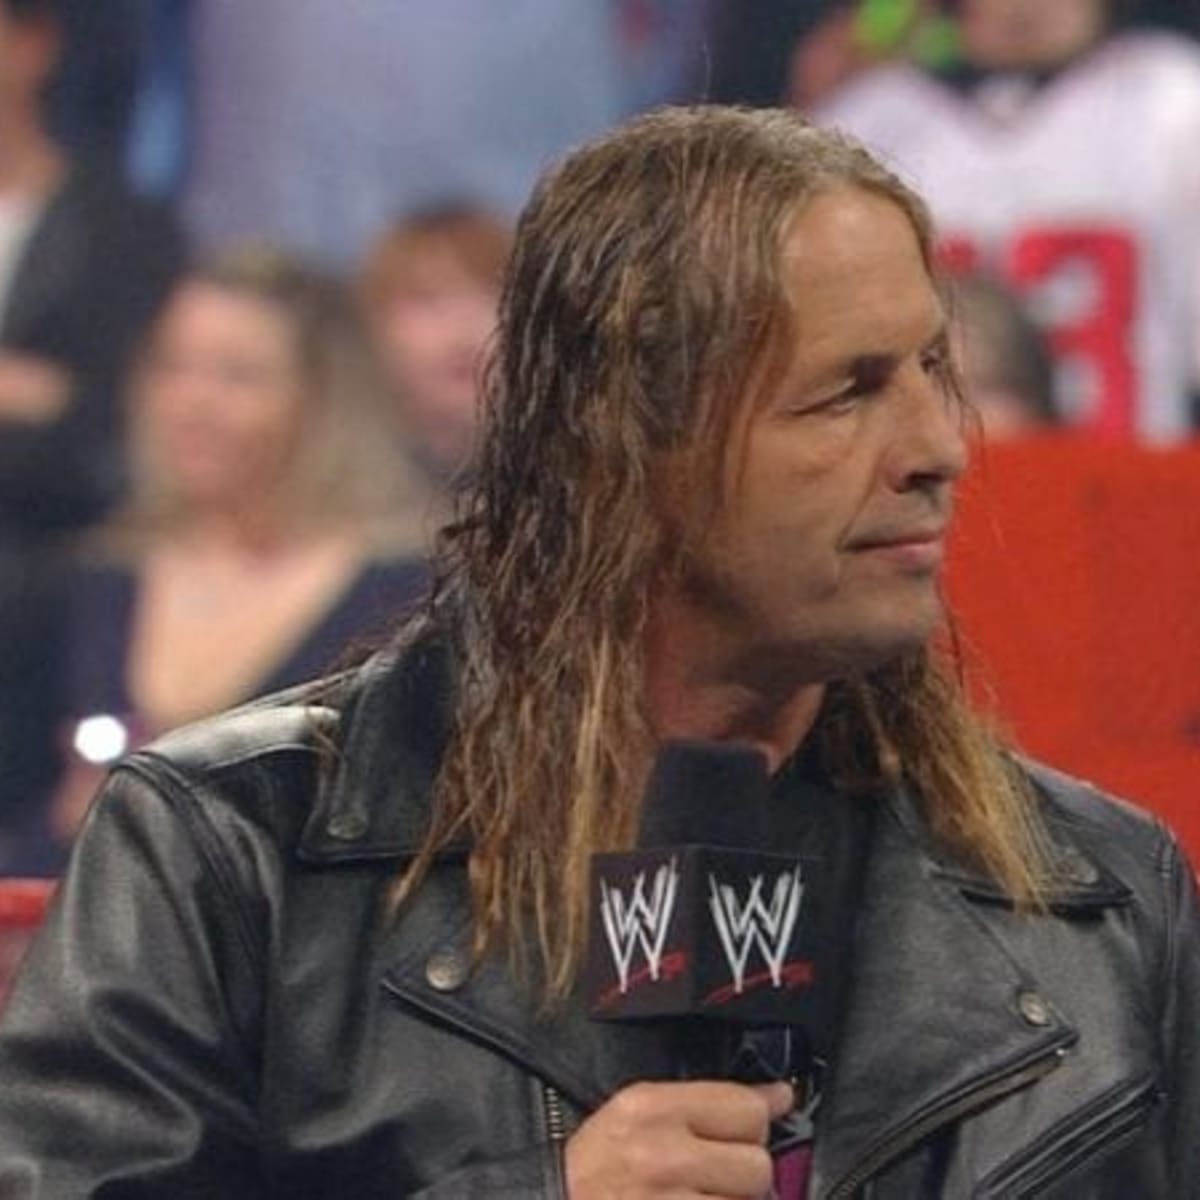 Reason why Bret Hart was not at Raw 25 - Wrestling News